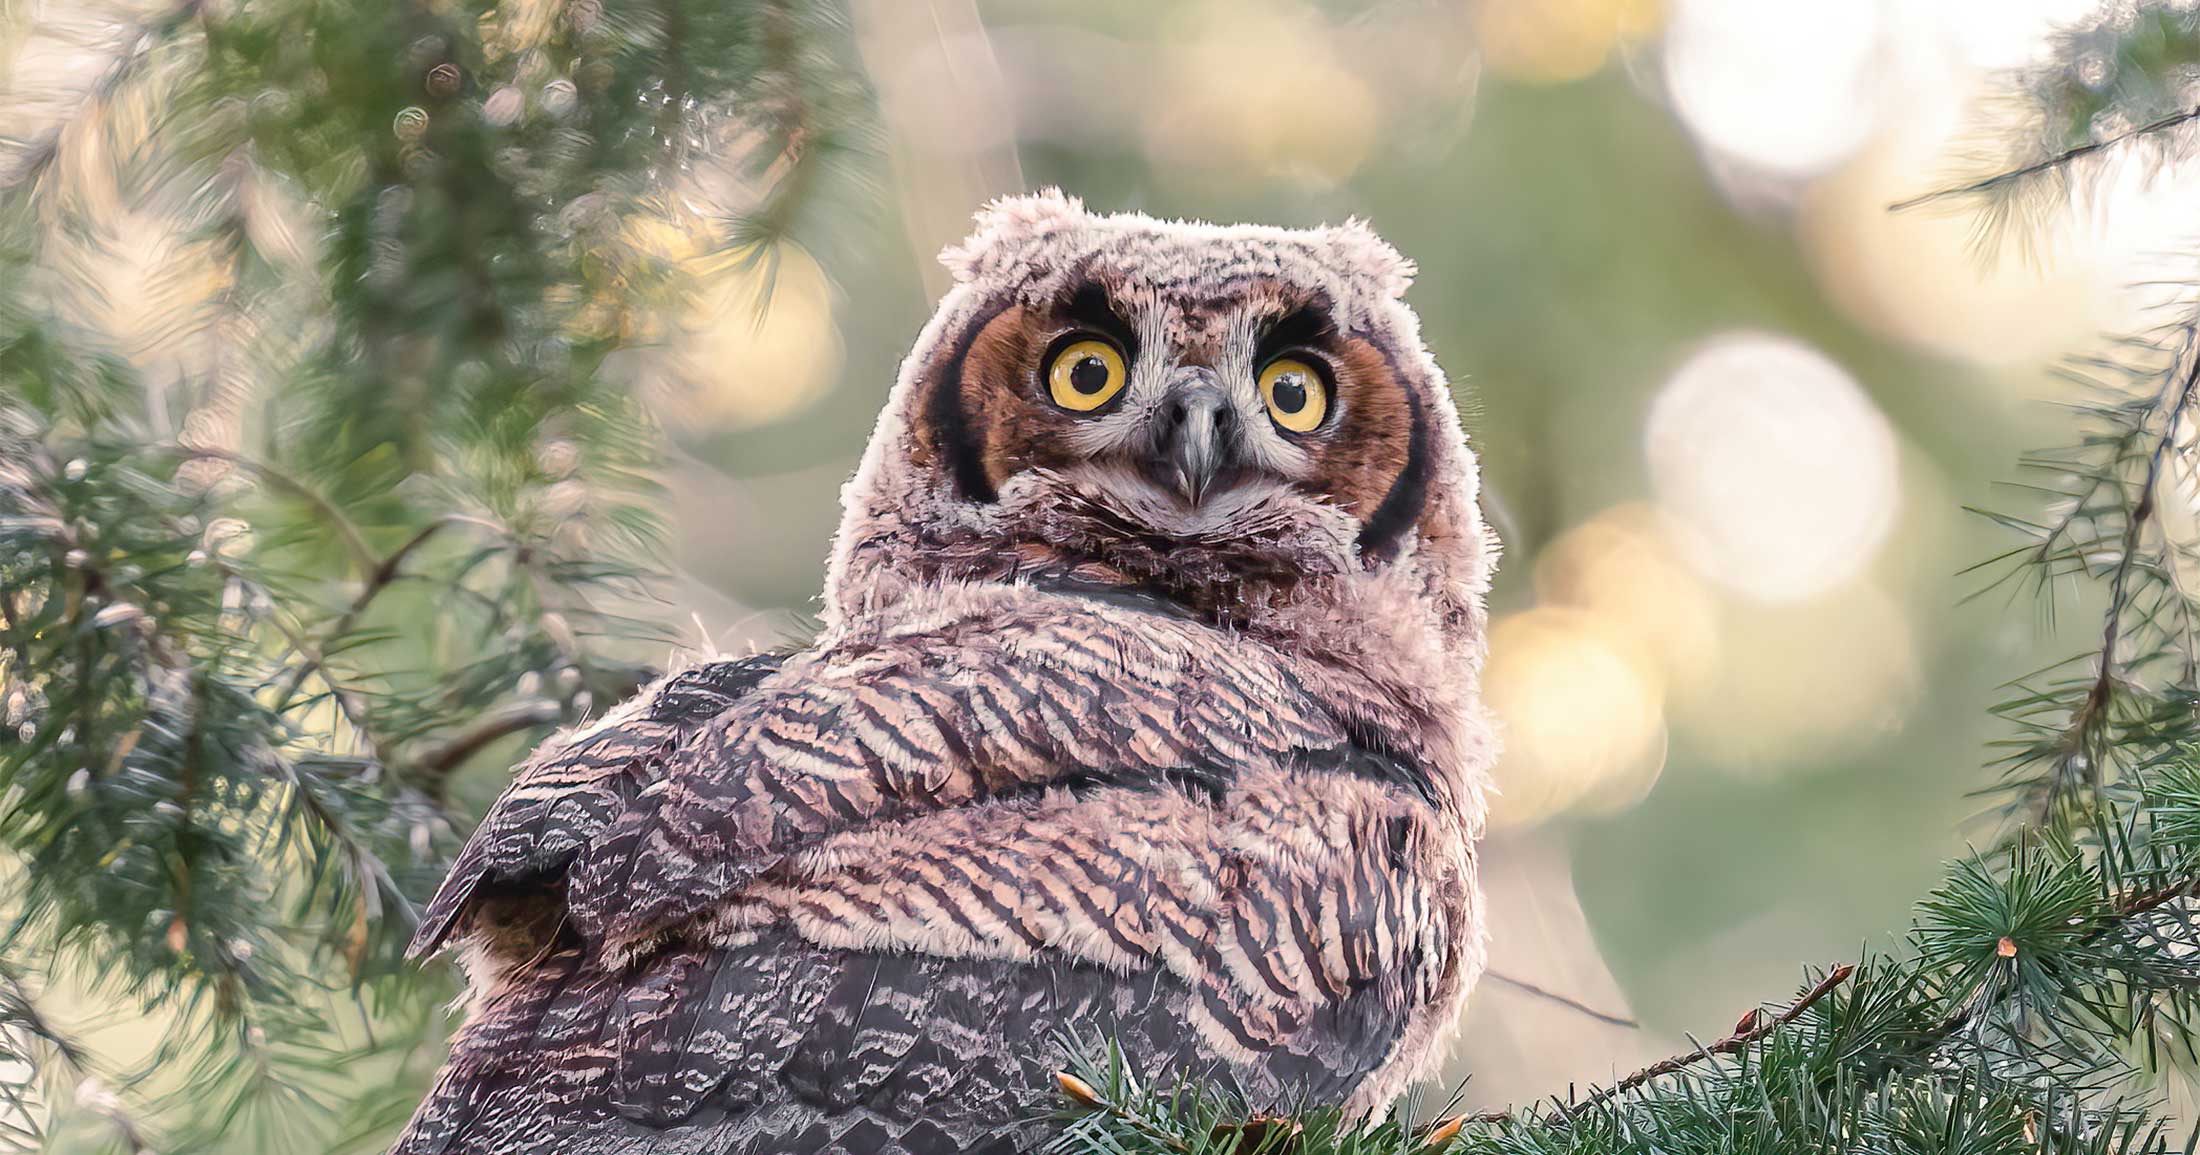 Owl in a tree looking at the camera.